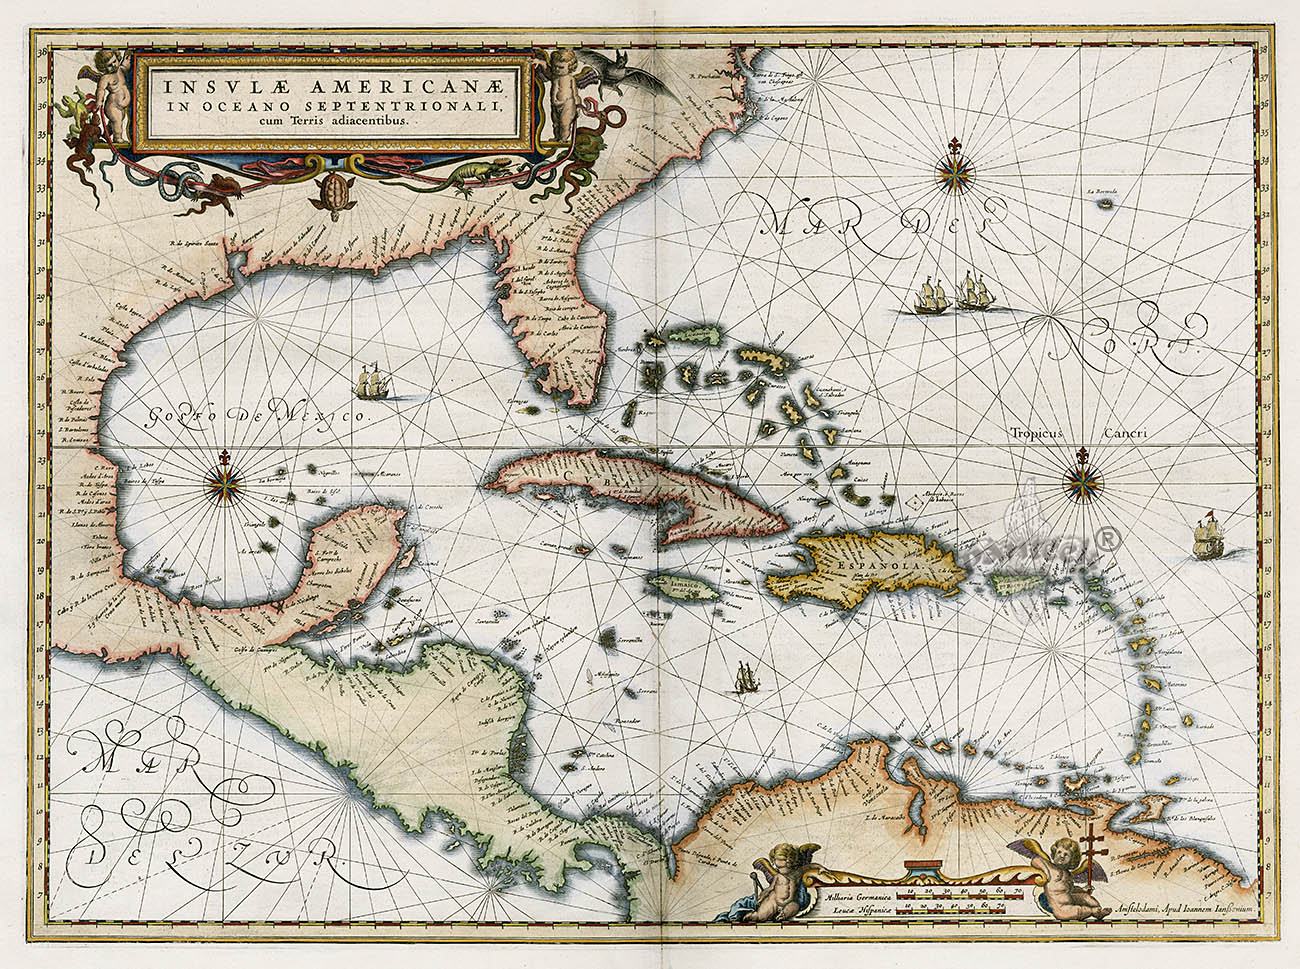 Map of Insulae Americanae in Oceano Septentrionali, C 1740 by Catographer Willem Janzoon Blaeu